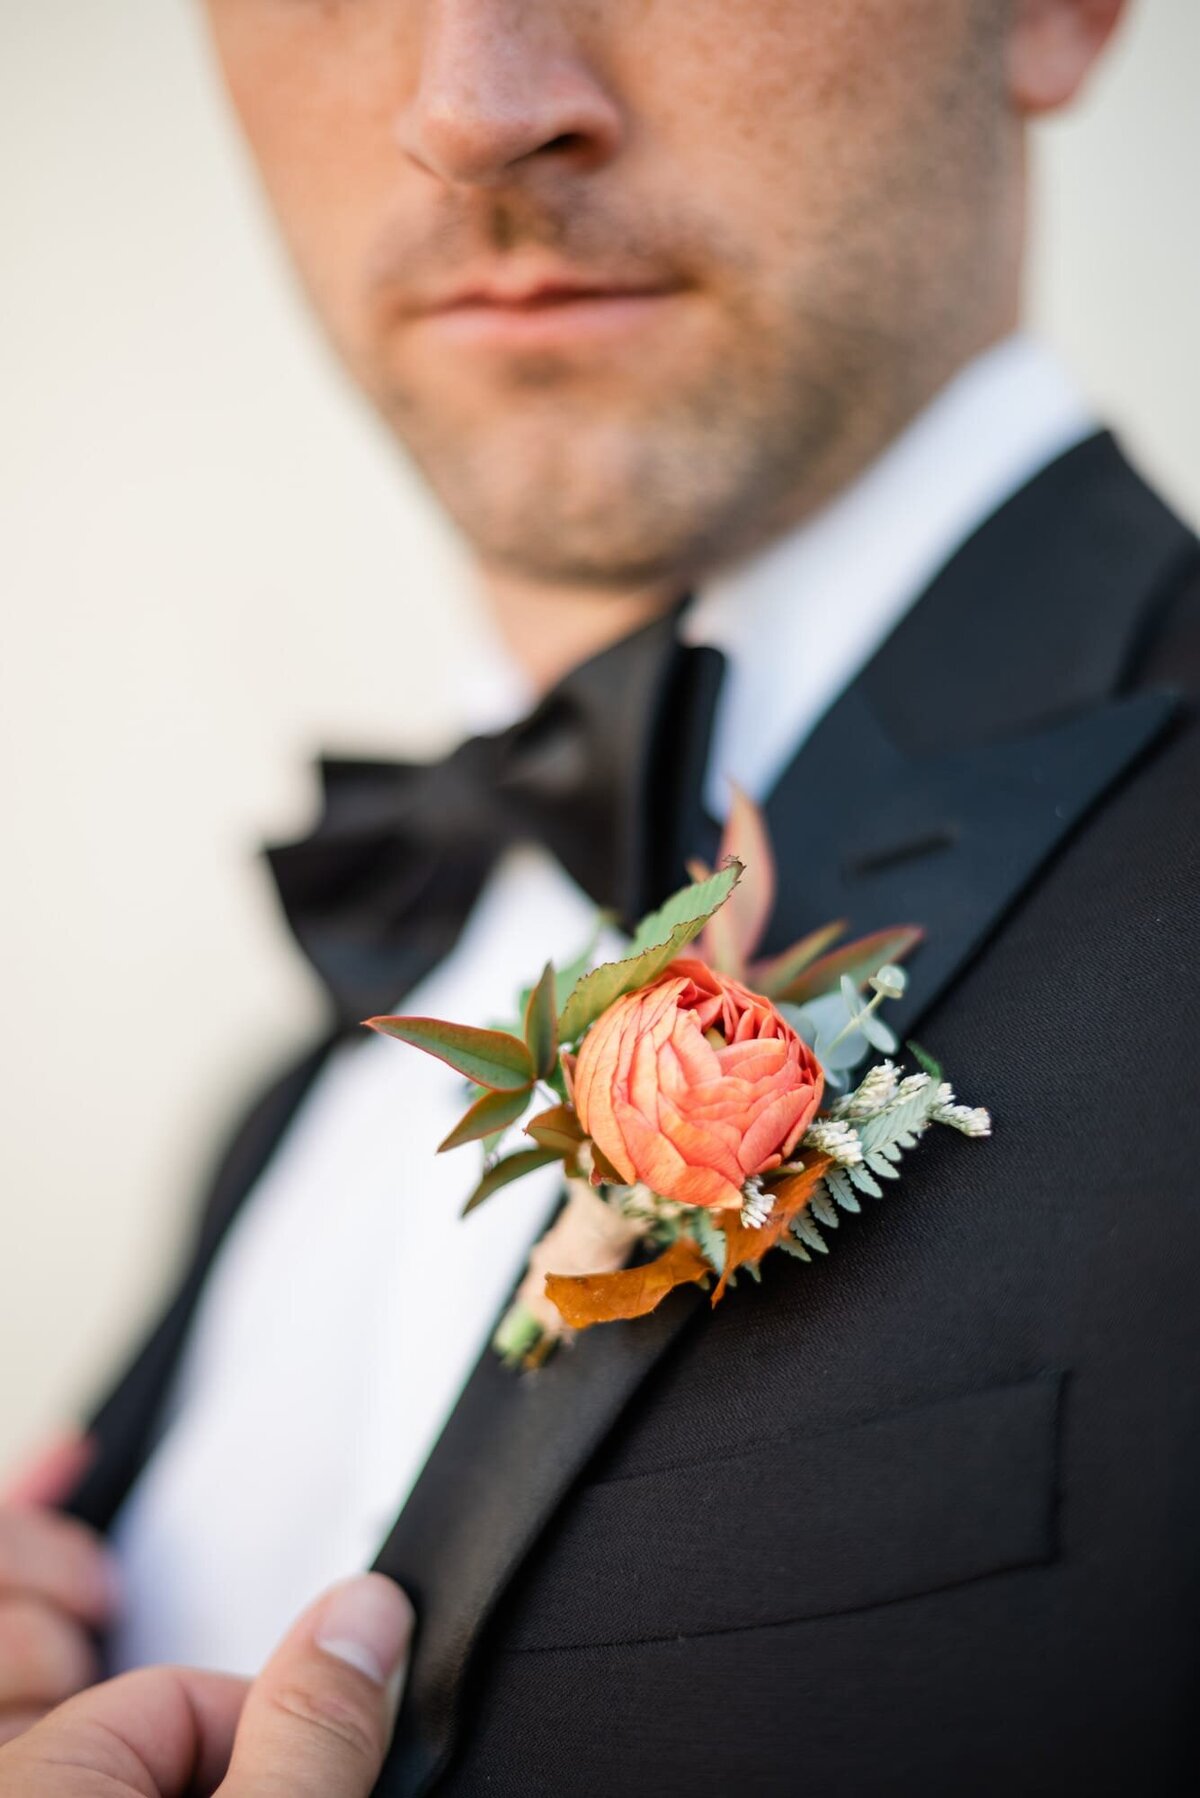 Grooms boutonniere on jacket